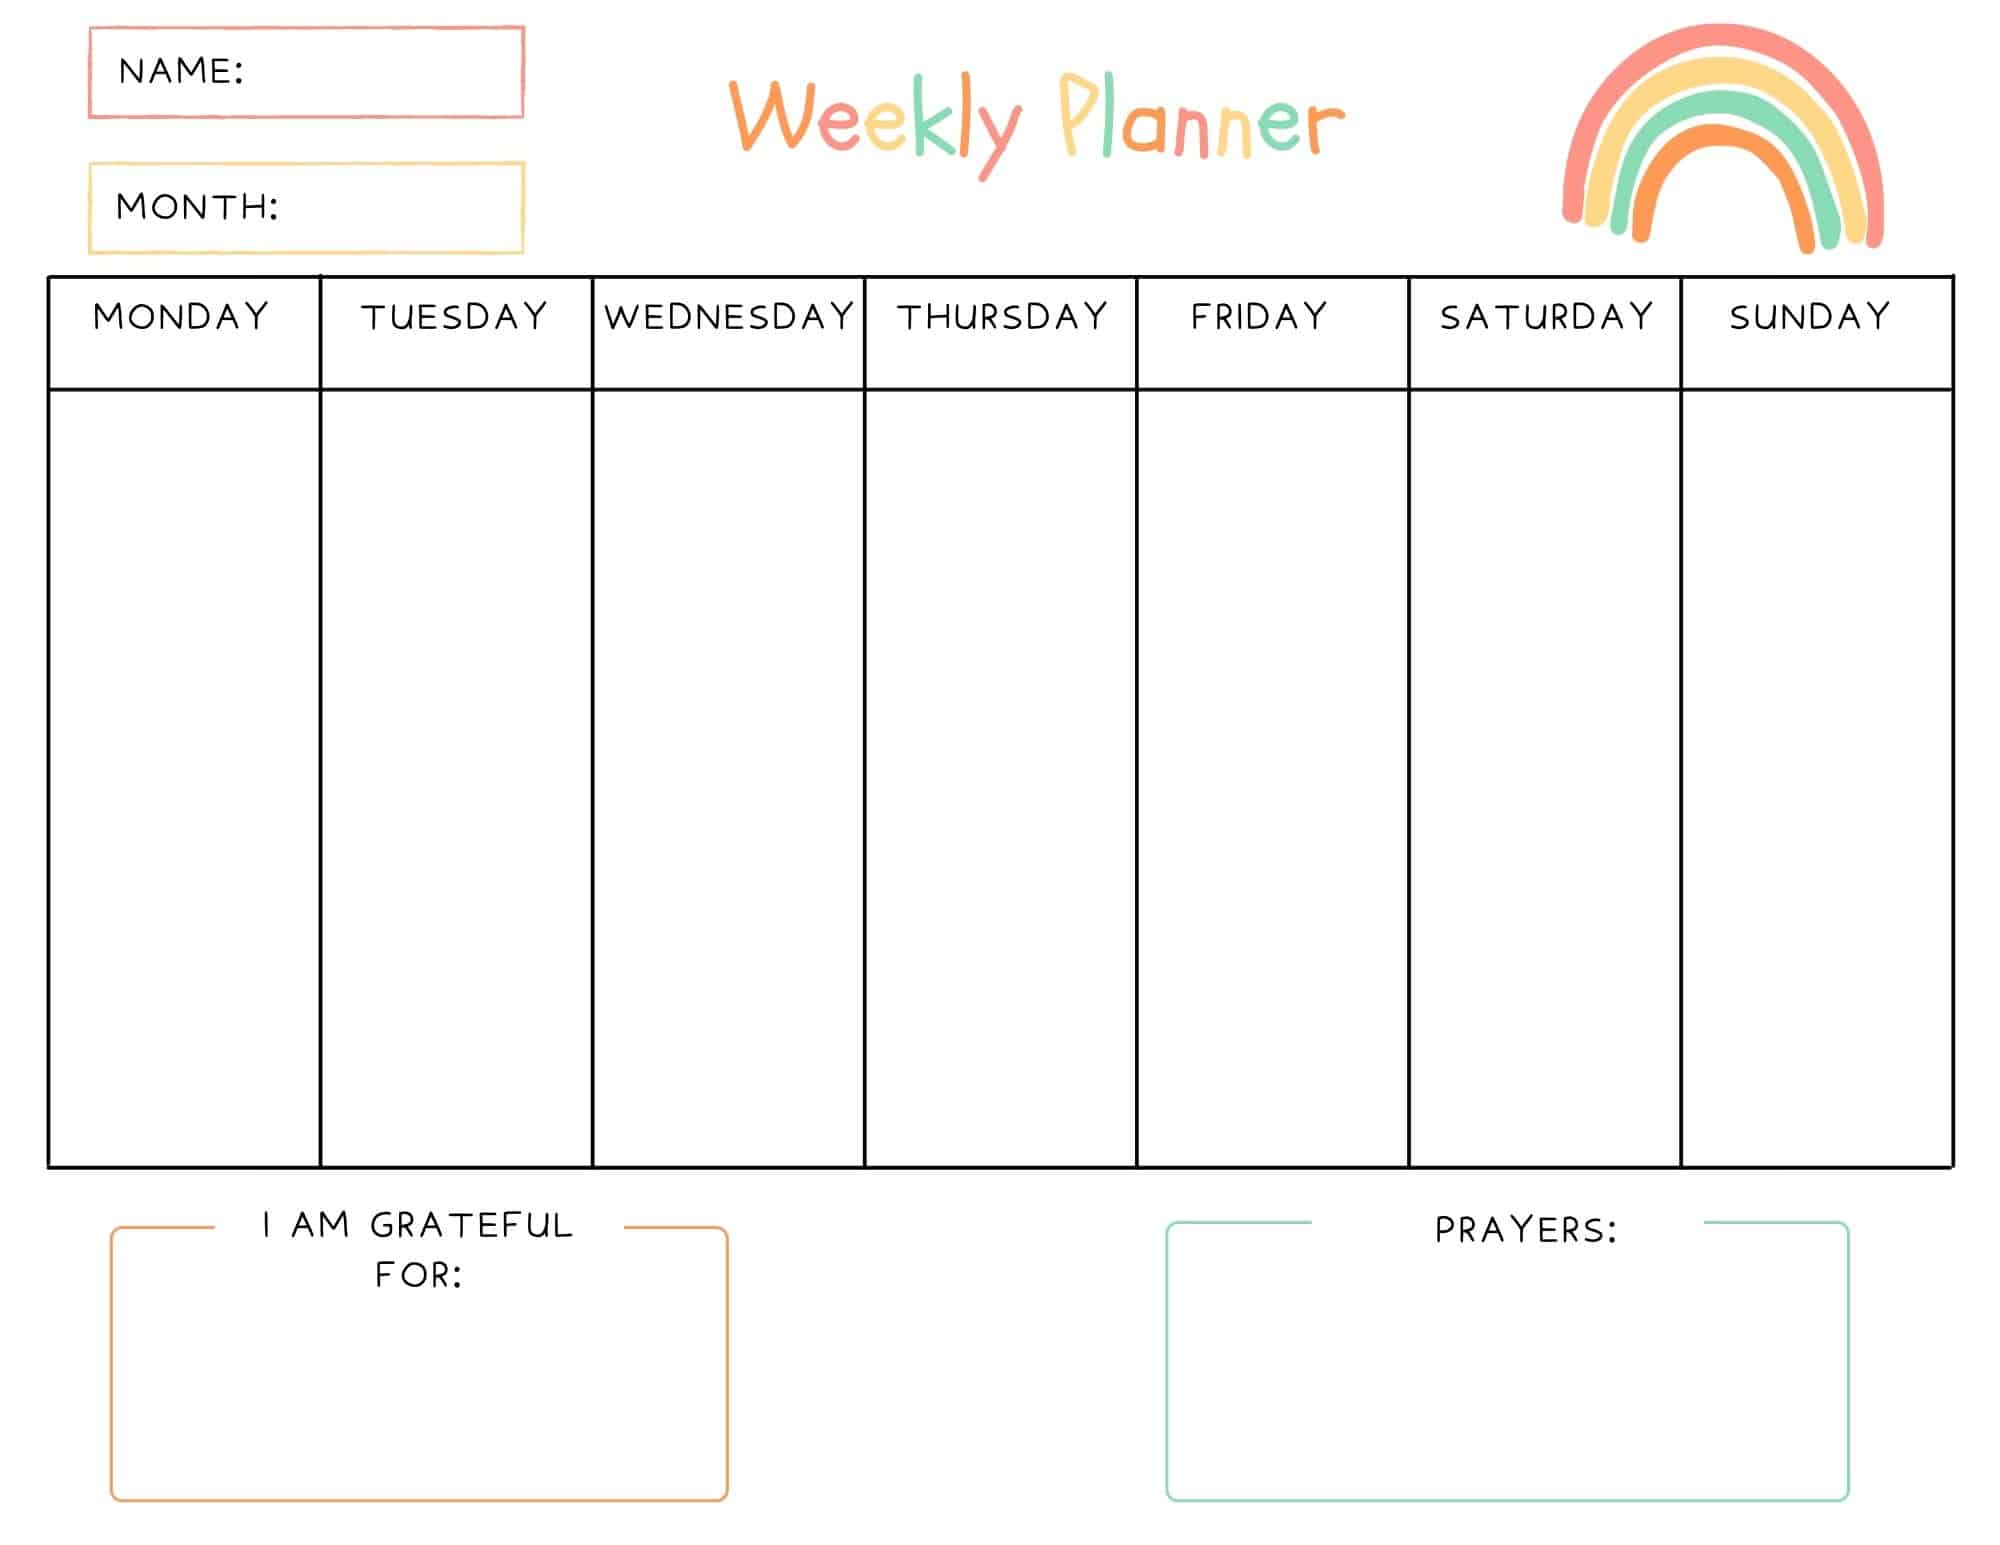 Free Weekly Planner for Kids (with Prayers   Gratitude) Out Upon the